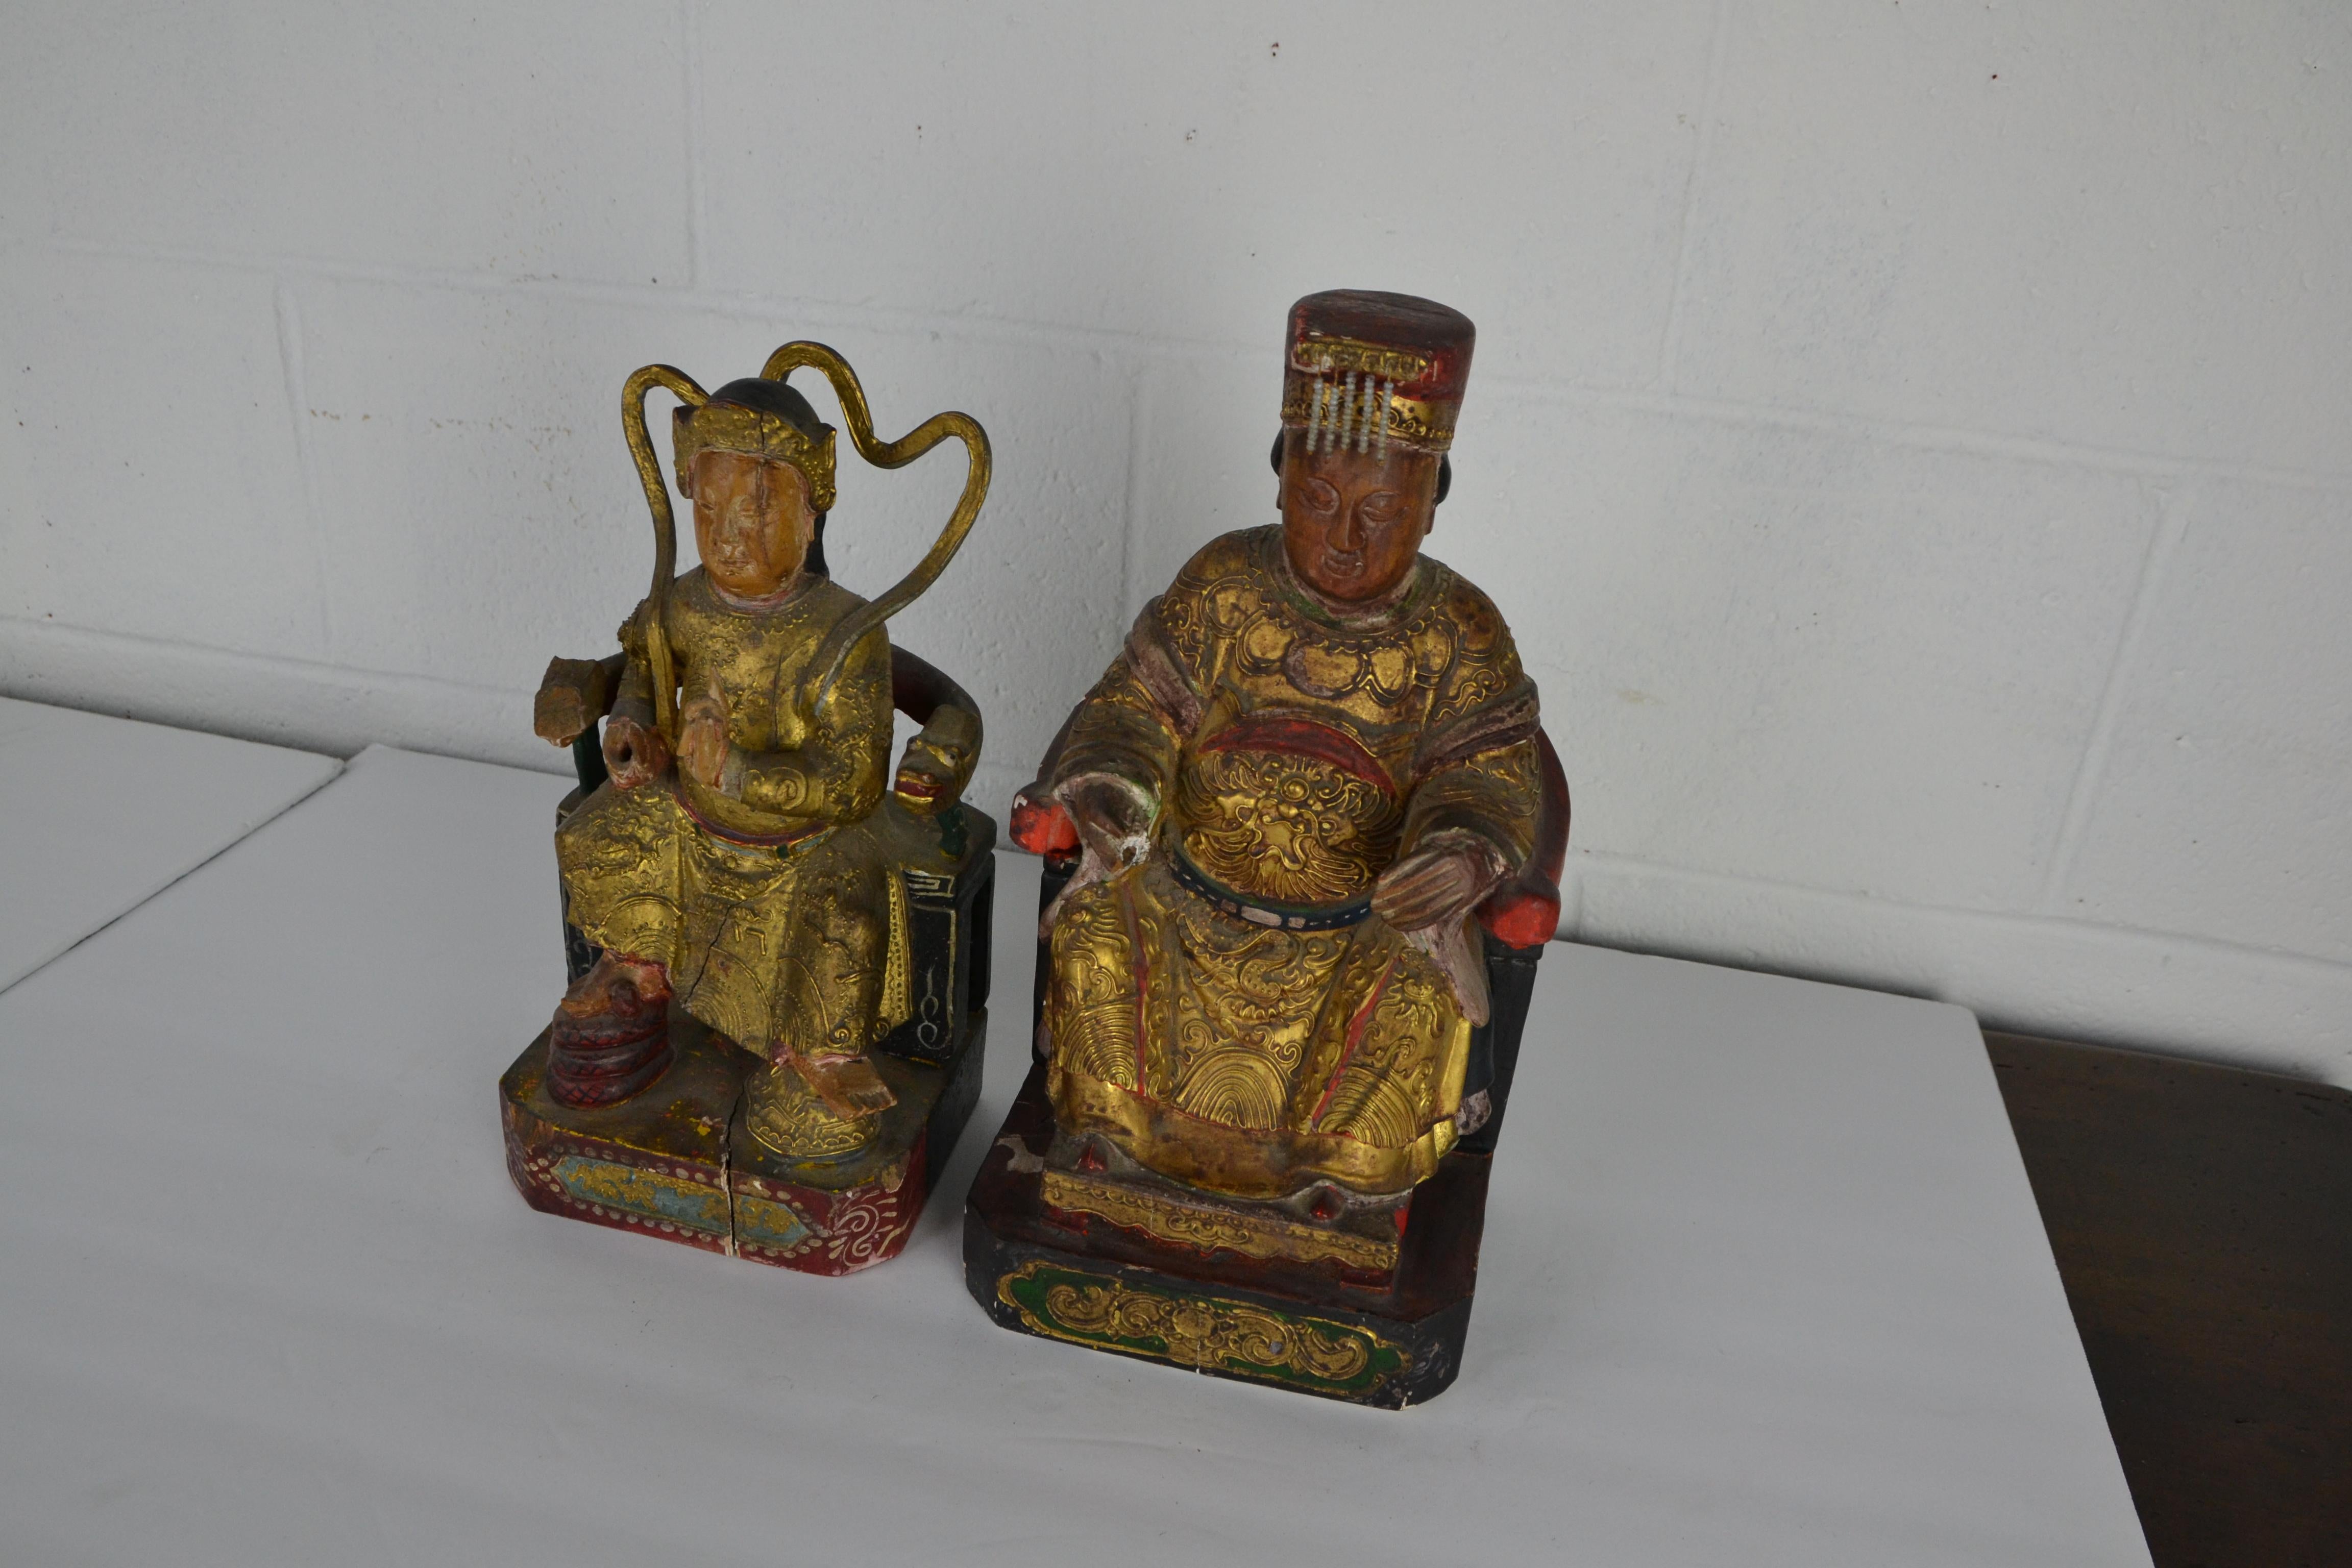 2 unrelated wood carved Chinese seated figurines. Nice detail to costumes, especially on the larger figure. Various losses to details and finish. Losses to right hand and the end of right chair-arm on the larger. On the smaller figure there is loss